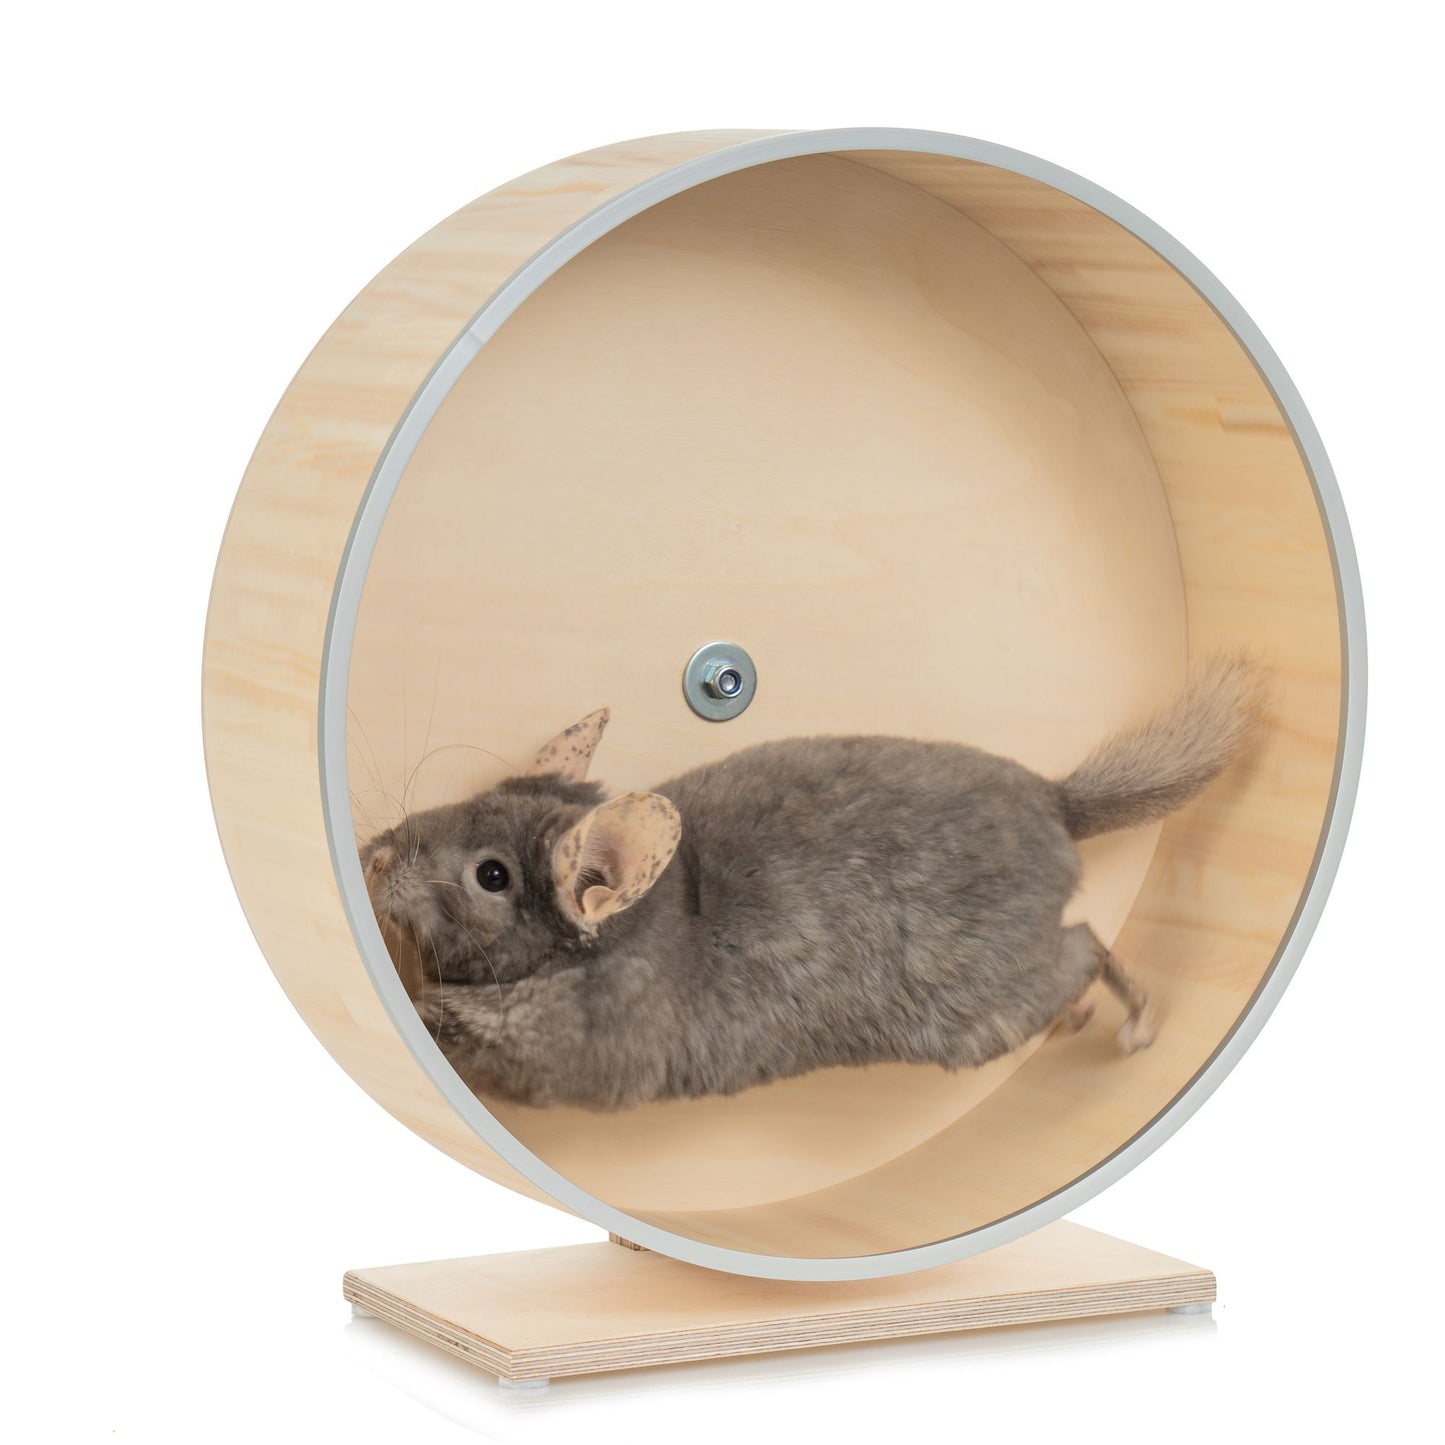 16-inch Chinchilla Running Wheel with protection aluminum rim installed frontally on a free-standing stand